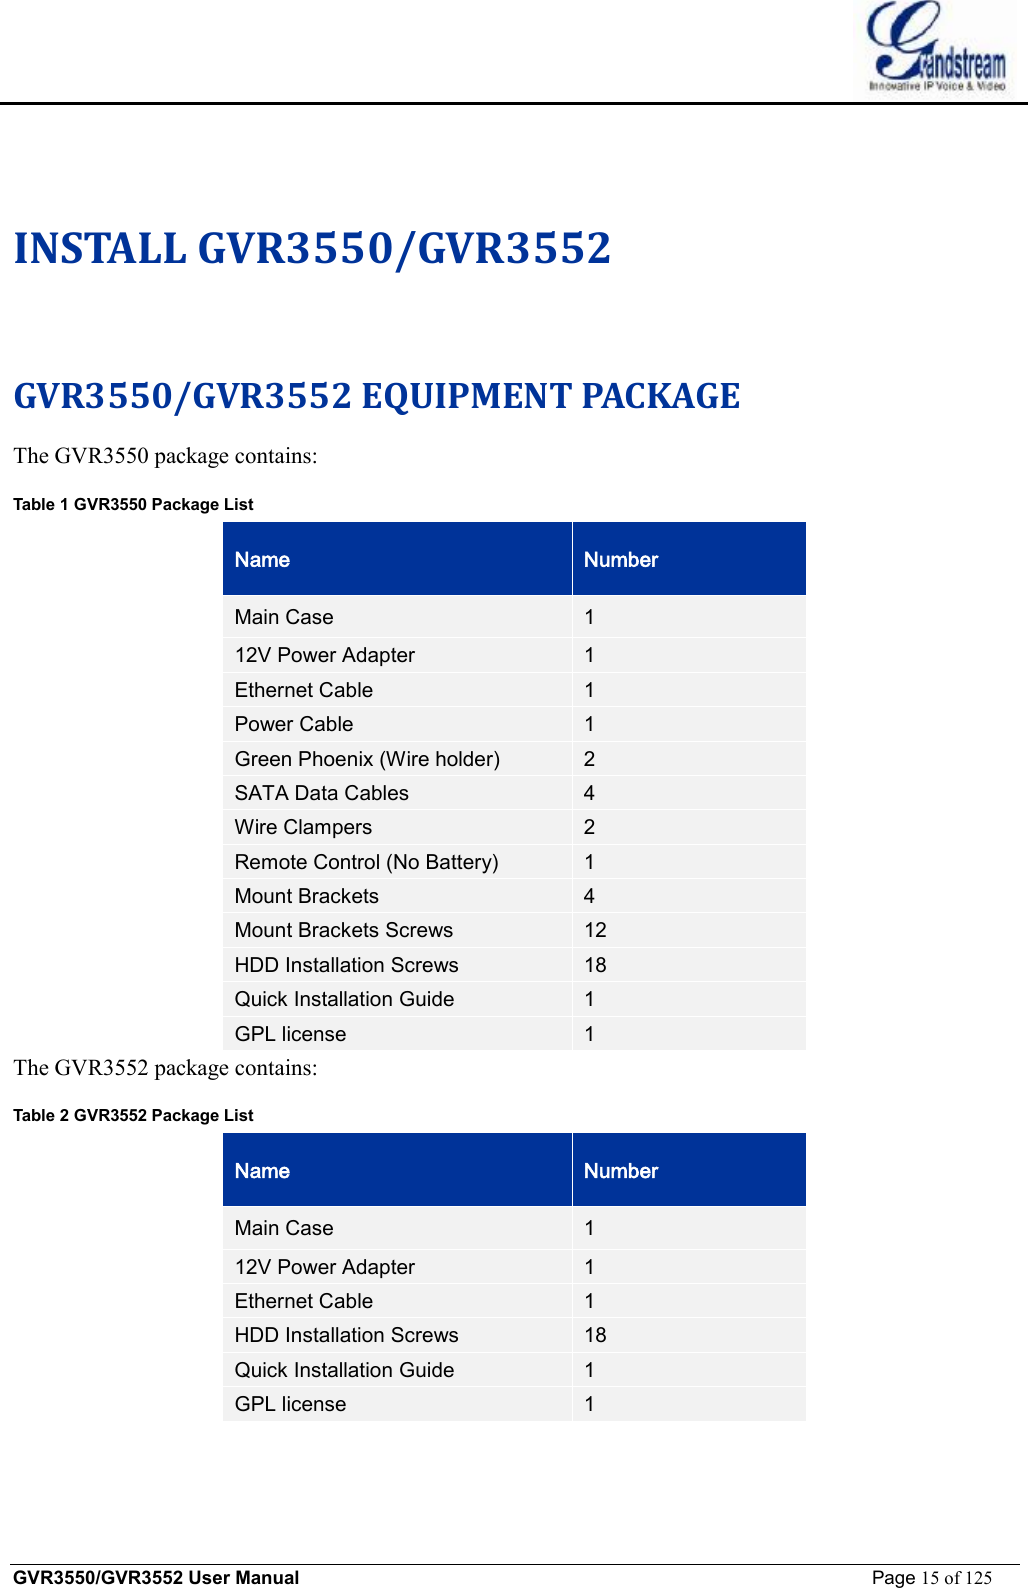    GVR3550/GVR3552 User Manual                                                             Page 15 of 125        INSTALL GVR3550/GVR3552 GVR3550/GVR3552 EQUIPMENT PACKAGE  The GVR3550 package contains: Table 1 GVR3550 Package List Name  Number Main Case  1 12V Power Adapter   1 Ethernet Cable  1 Power Cable  1 Green Phoenix (Wire holder)  2 SATA Data Cables  4 Wire Clampers  2 Remote Control (No Battery)  1 Mount Brackets  4 Mount Brackets Screws  12 HDD Installation Screws  18 Quick Installation Guide  1 GPL license  1 The GVR3552 package contains: Table 2 GVR3552 Package List Name  Number Main Case  1 12V Power Adapter   1 Ethernet Cable  1 HDD Installation Screws  18 Quick Installation Guide  1 GPL license  1  